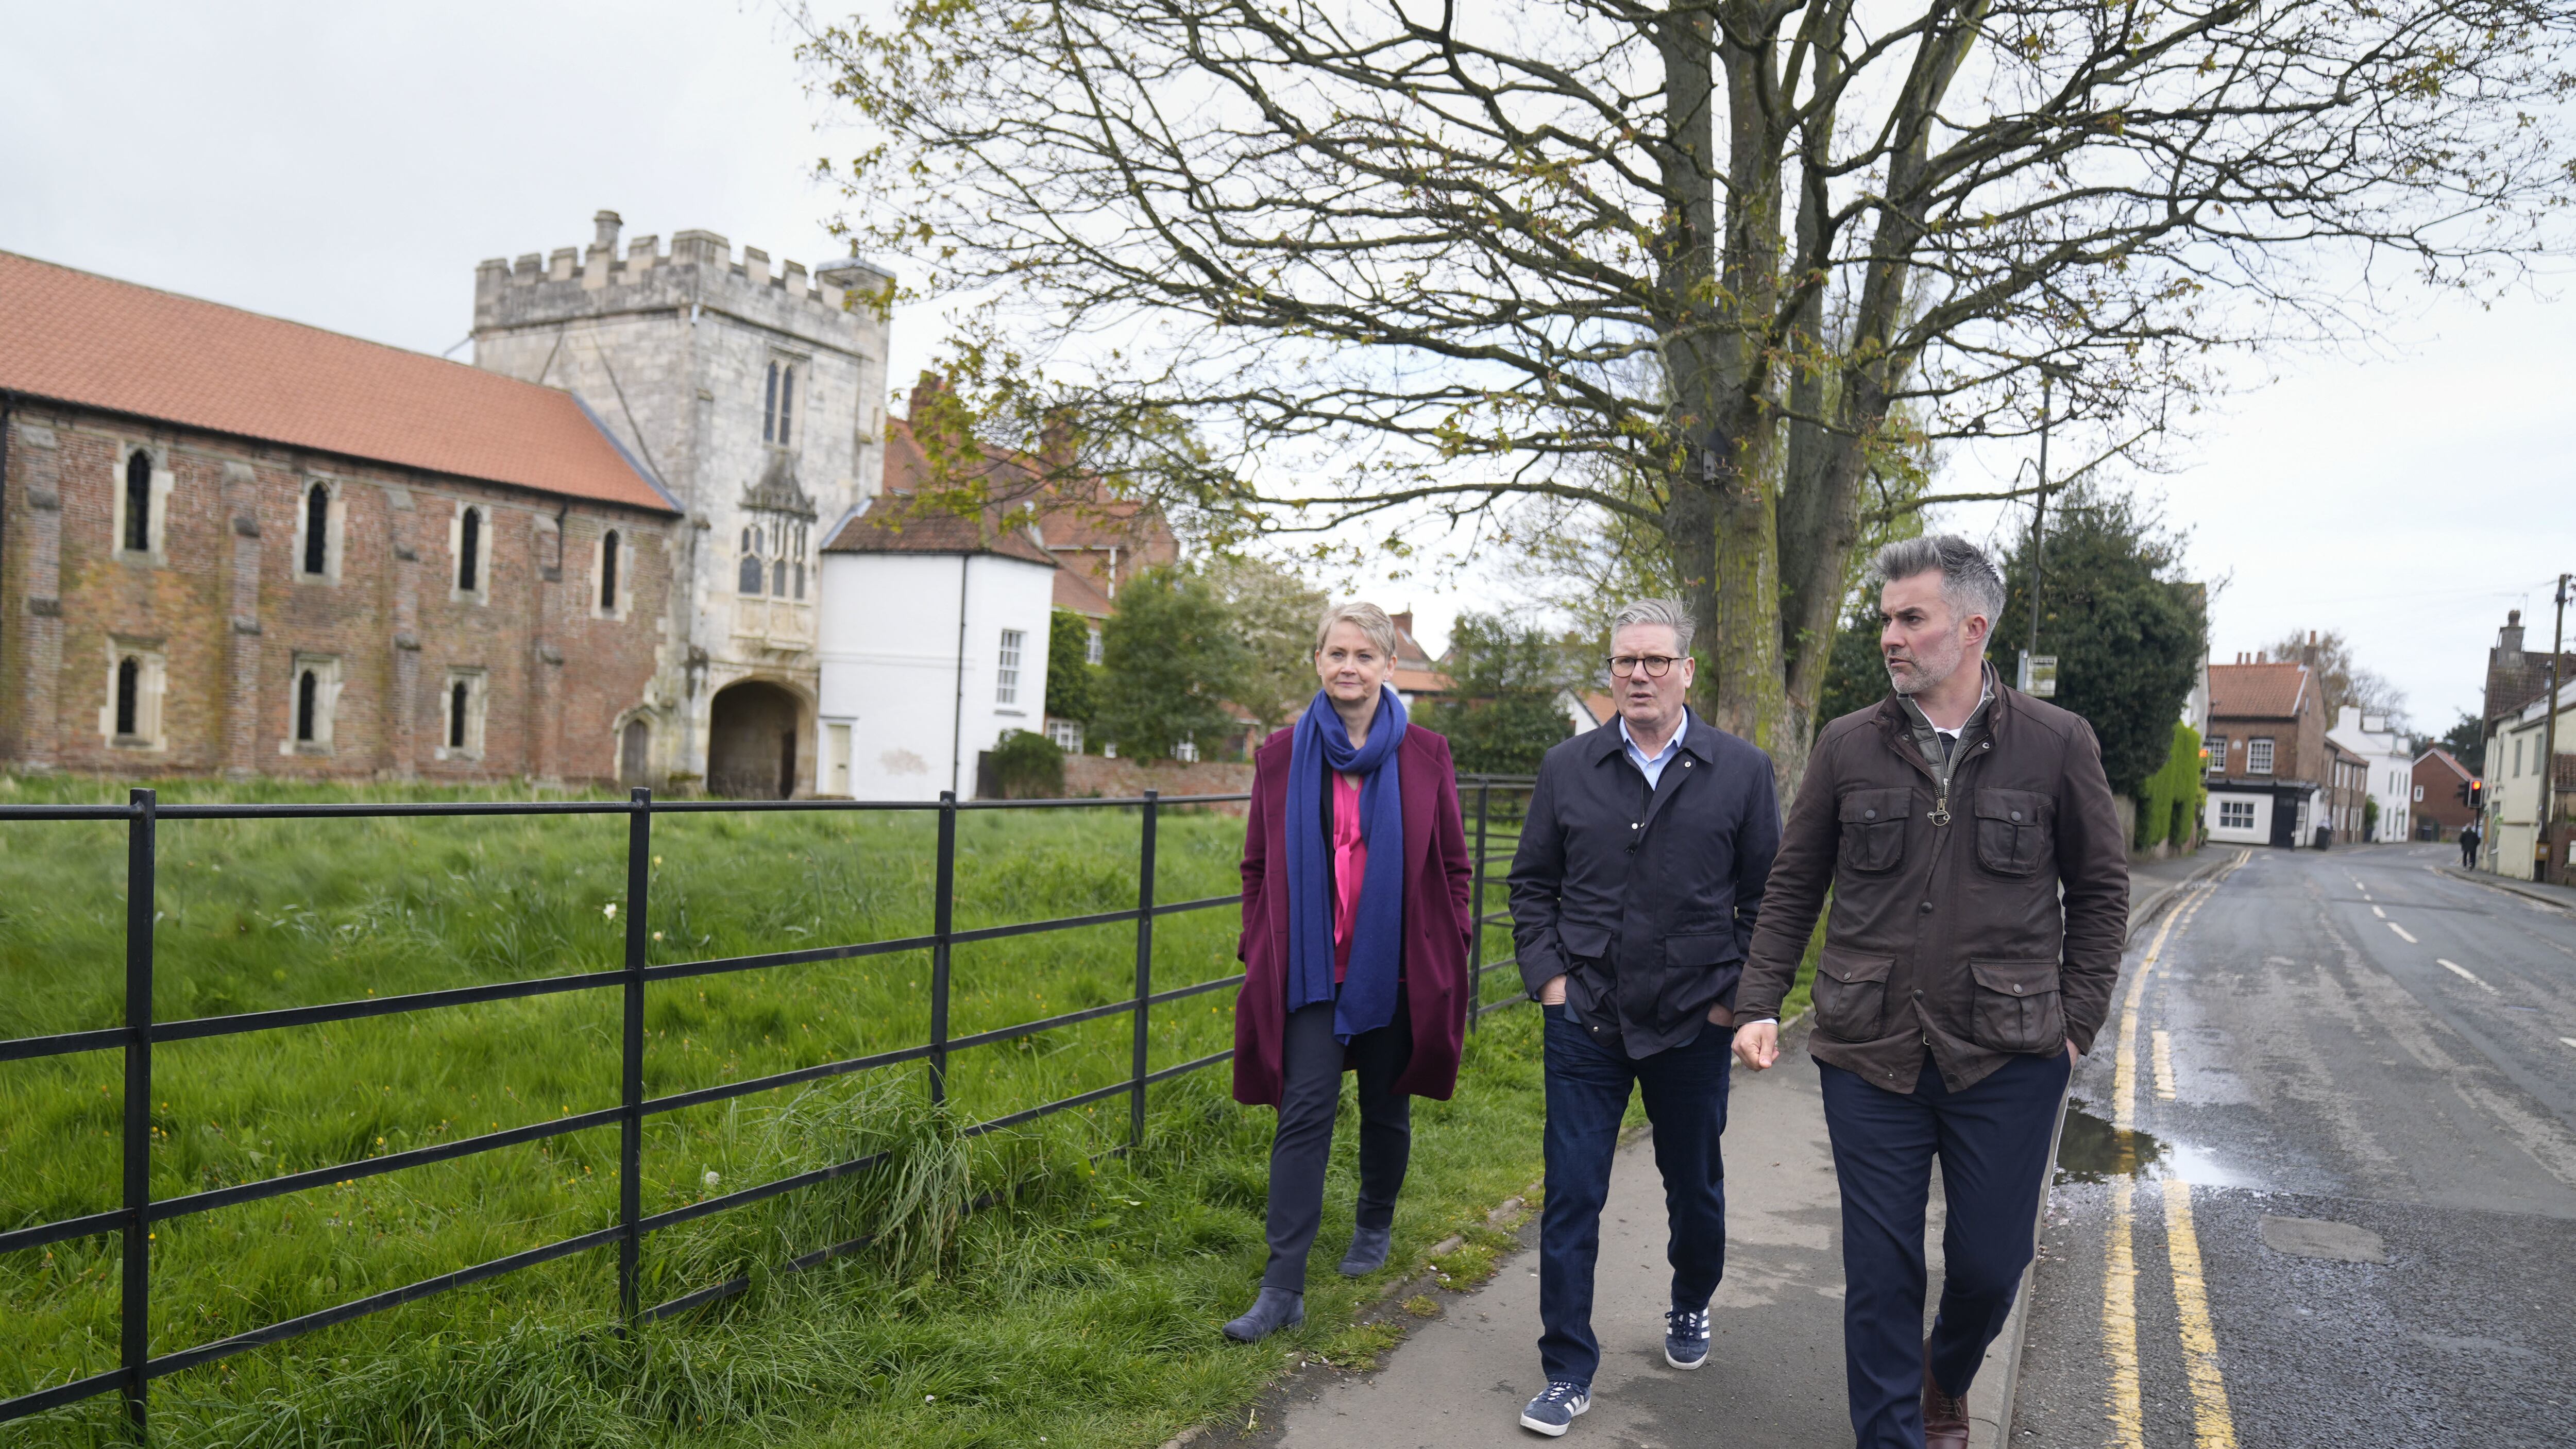 Labour leader Sir Keir Starmer joined shadow home secretary Yvette Cooper and David Skaith the Labour candidate for the York and North Yorkshire Mayoral Election, during a visit to the village of Cawood, Selby